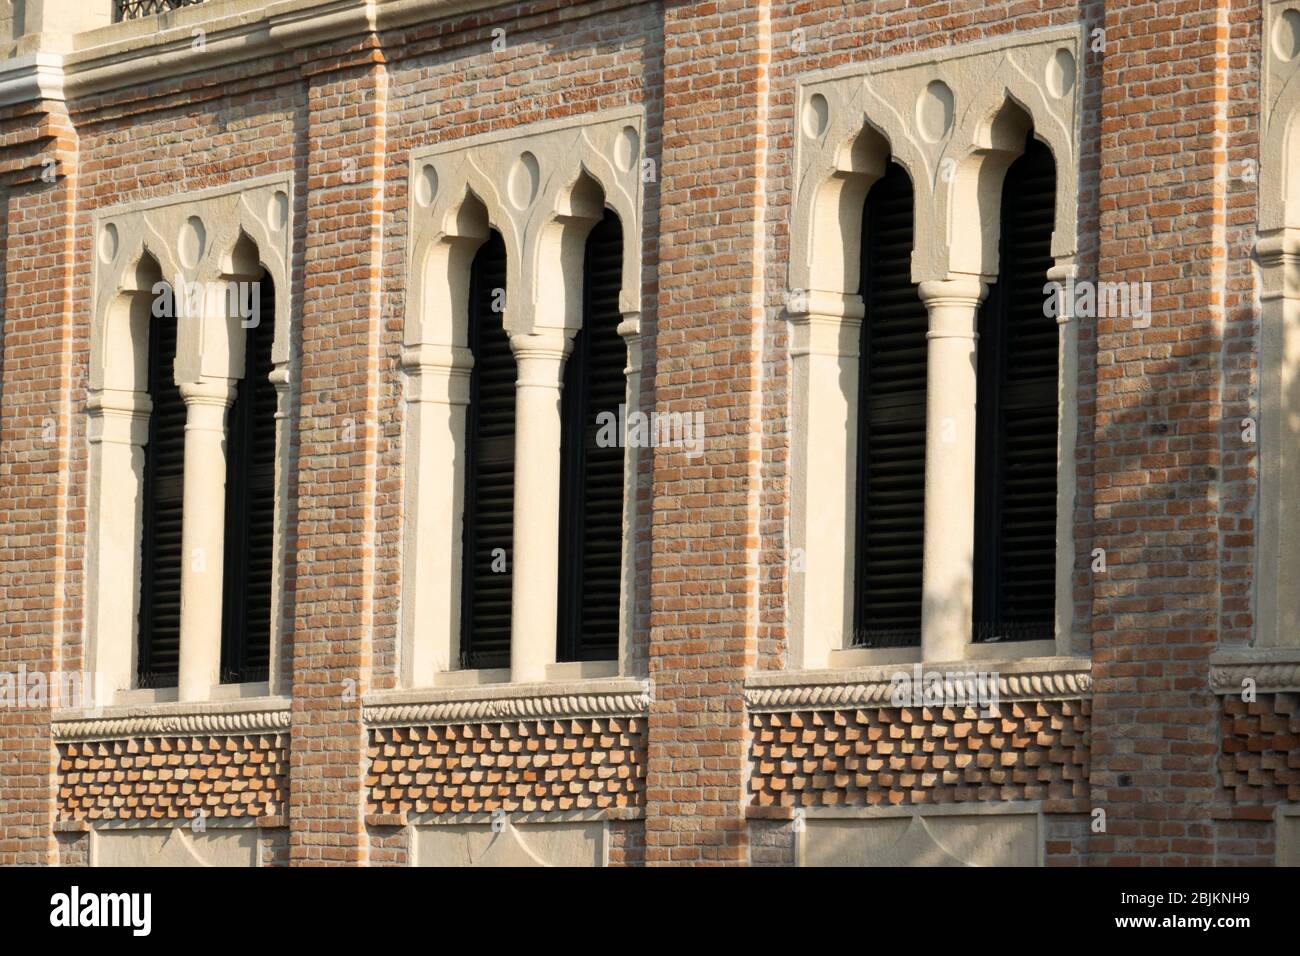 Windows of the Hotel Excelsior on the Lido, Venice, Italy. Stock Photo